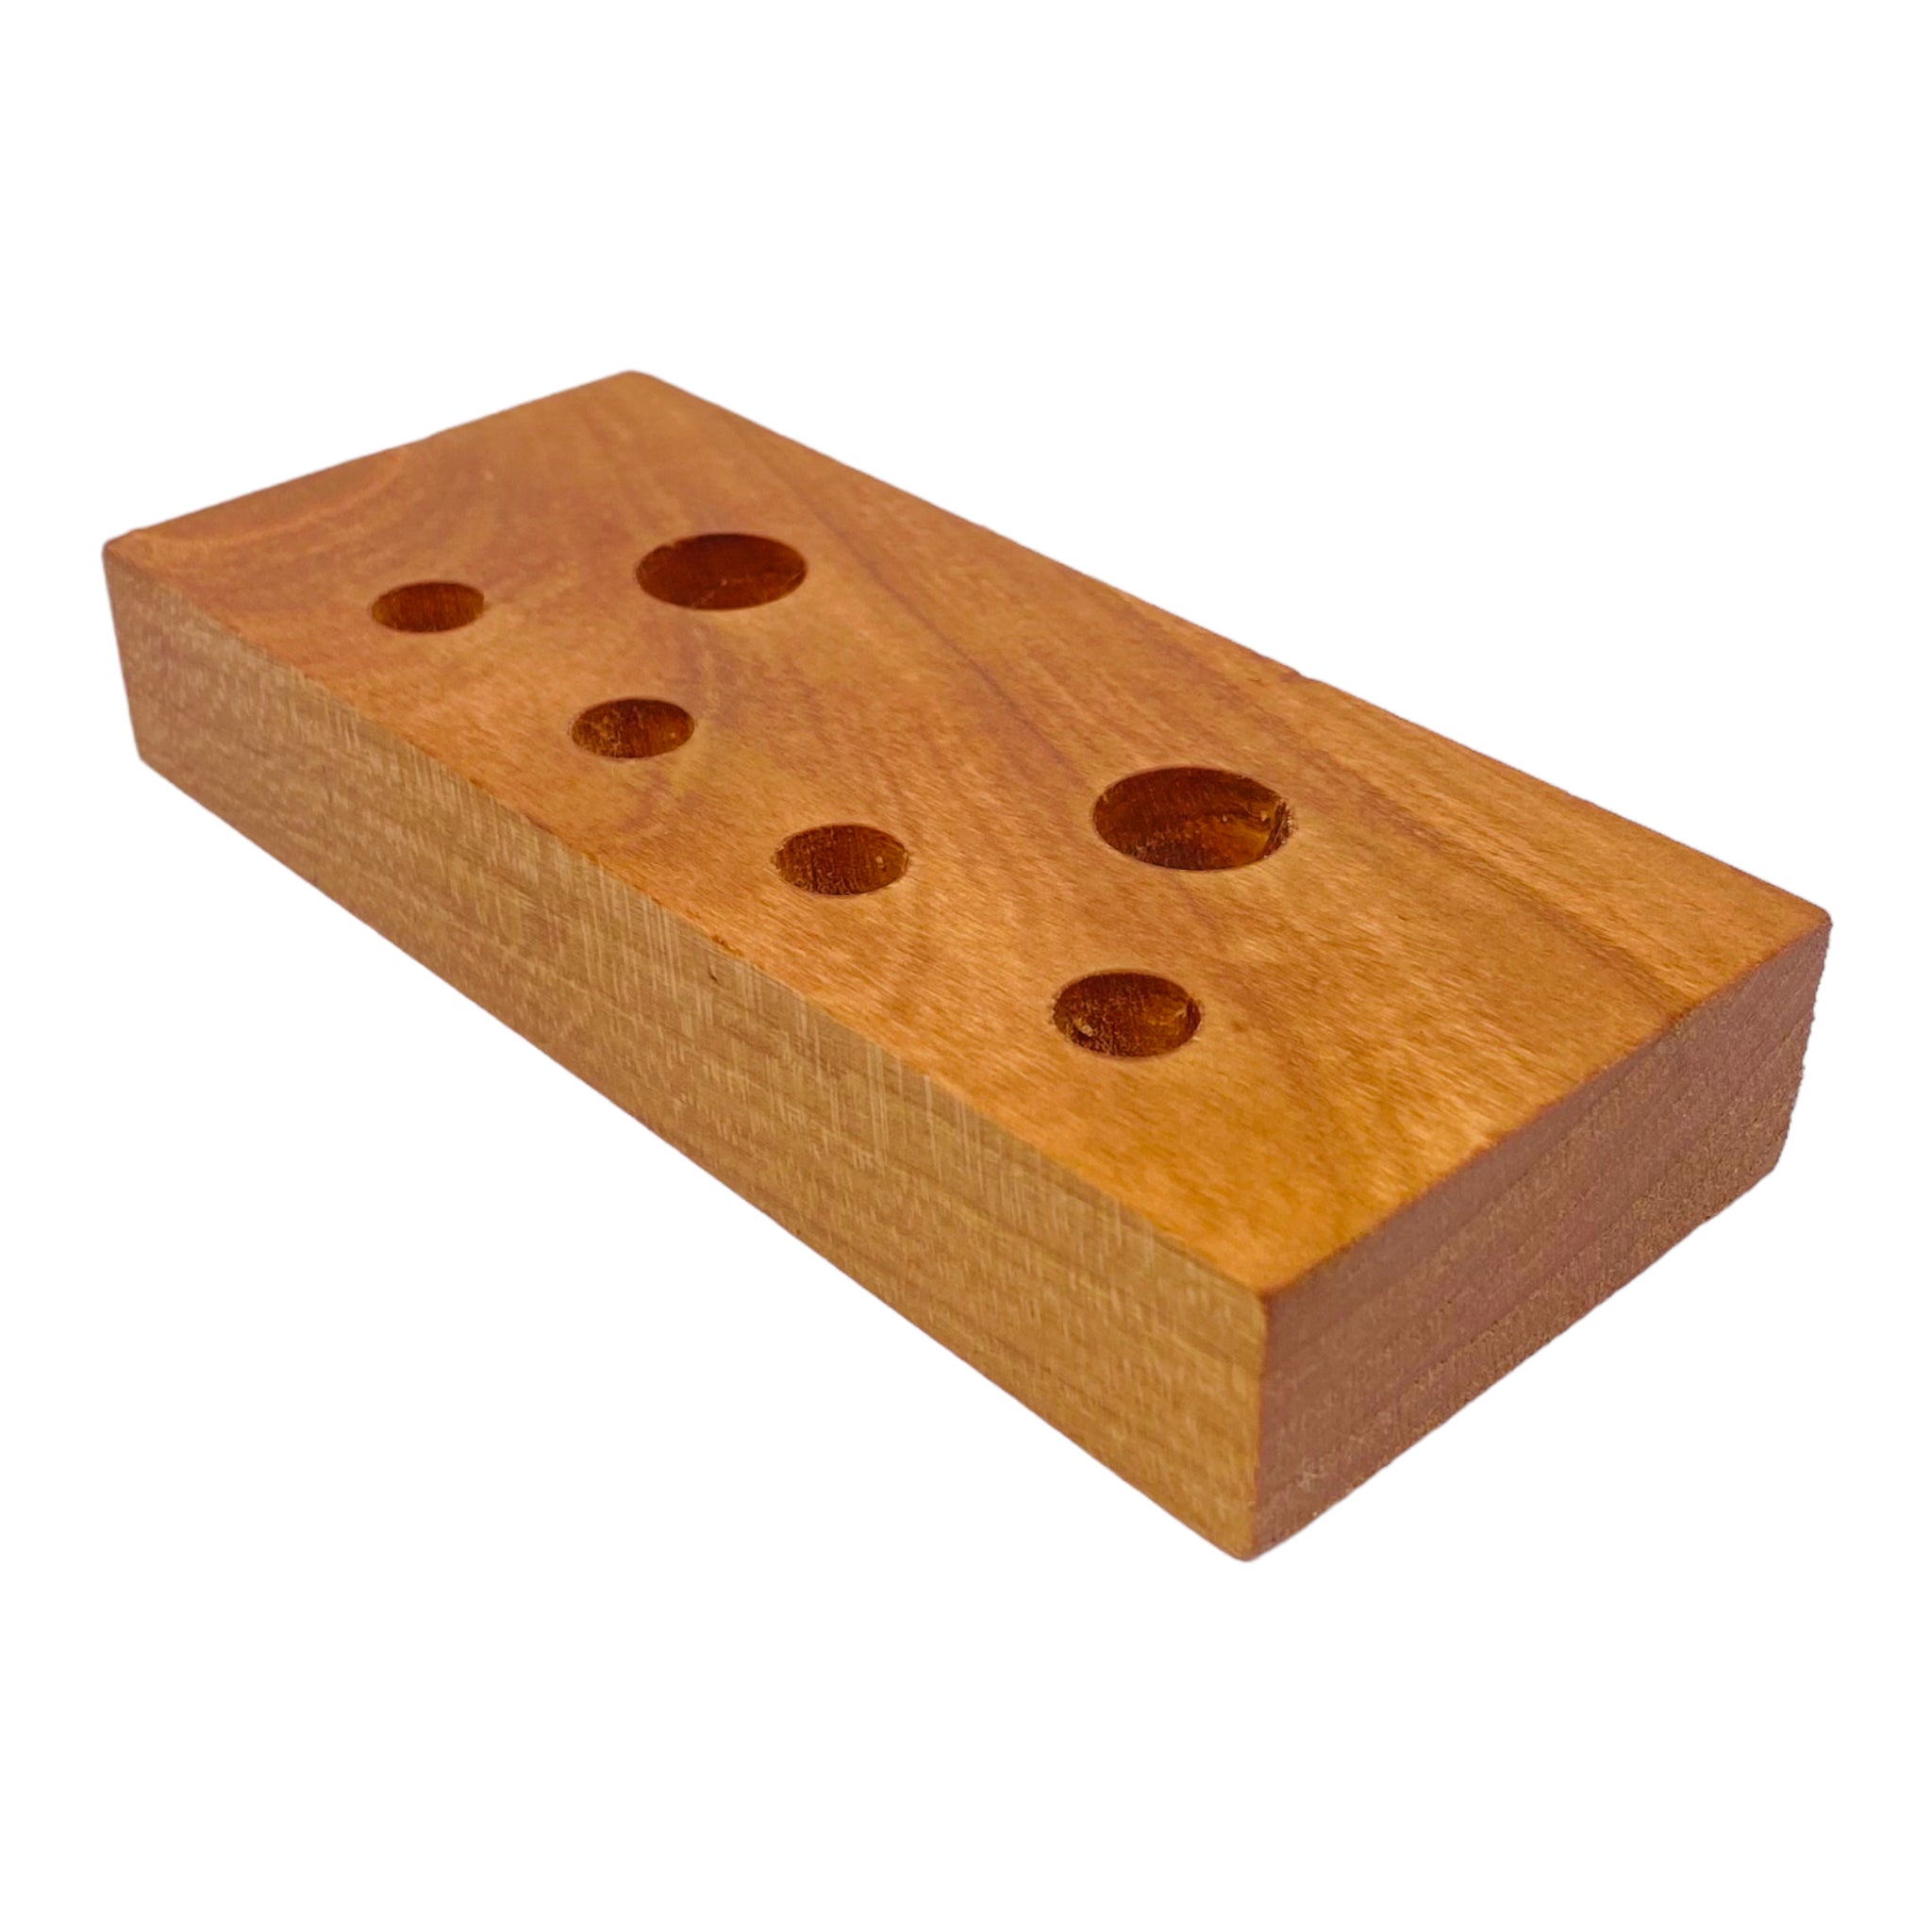 mahogany 6 Hole Wood Display Stand Holder For 14mm And 10mm Bong Bowl Pieces Or Quartz Bangers